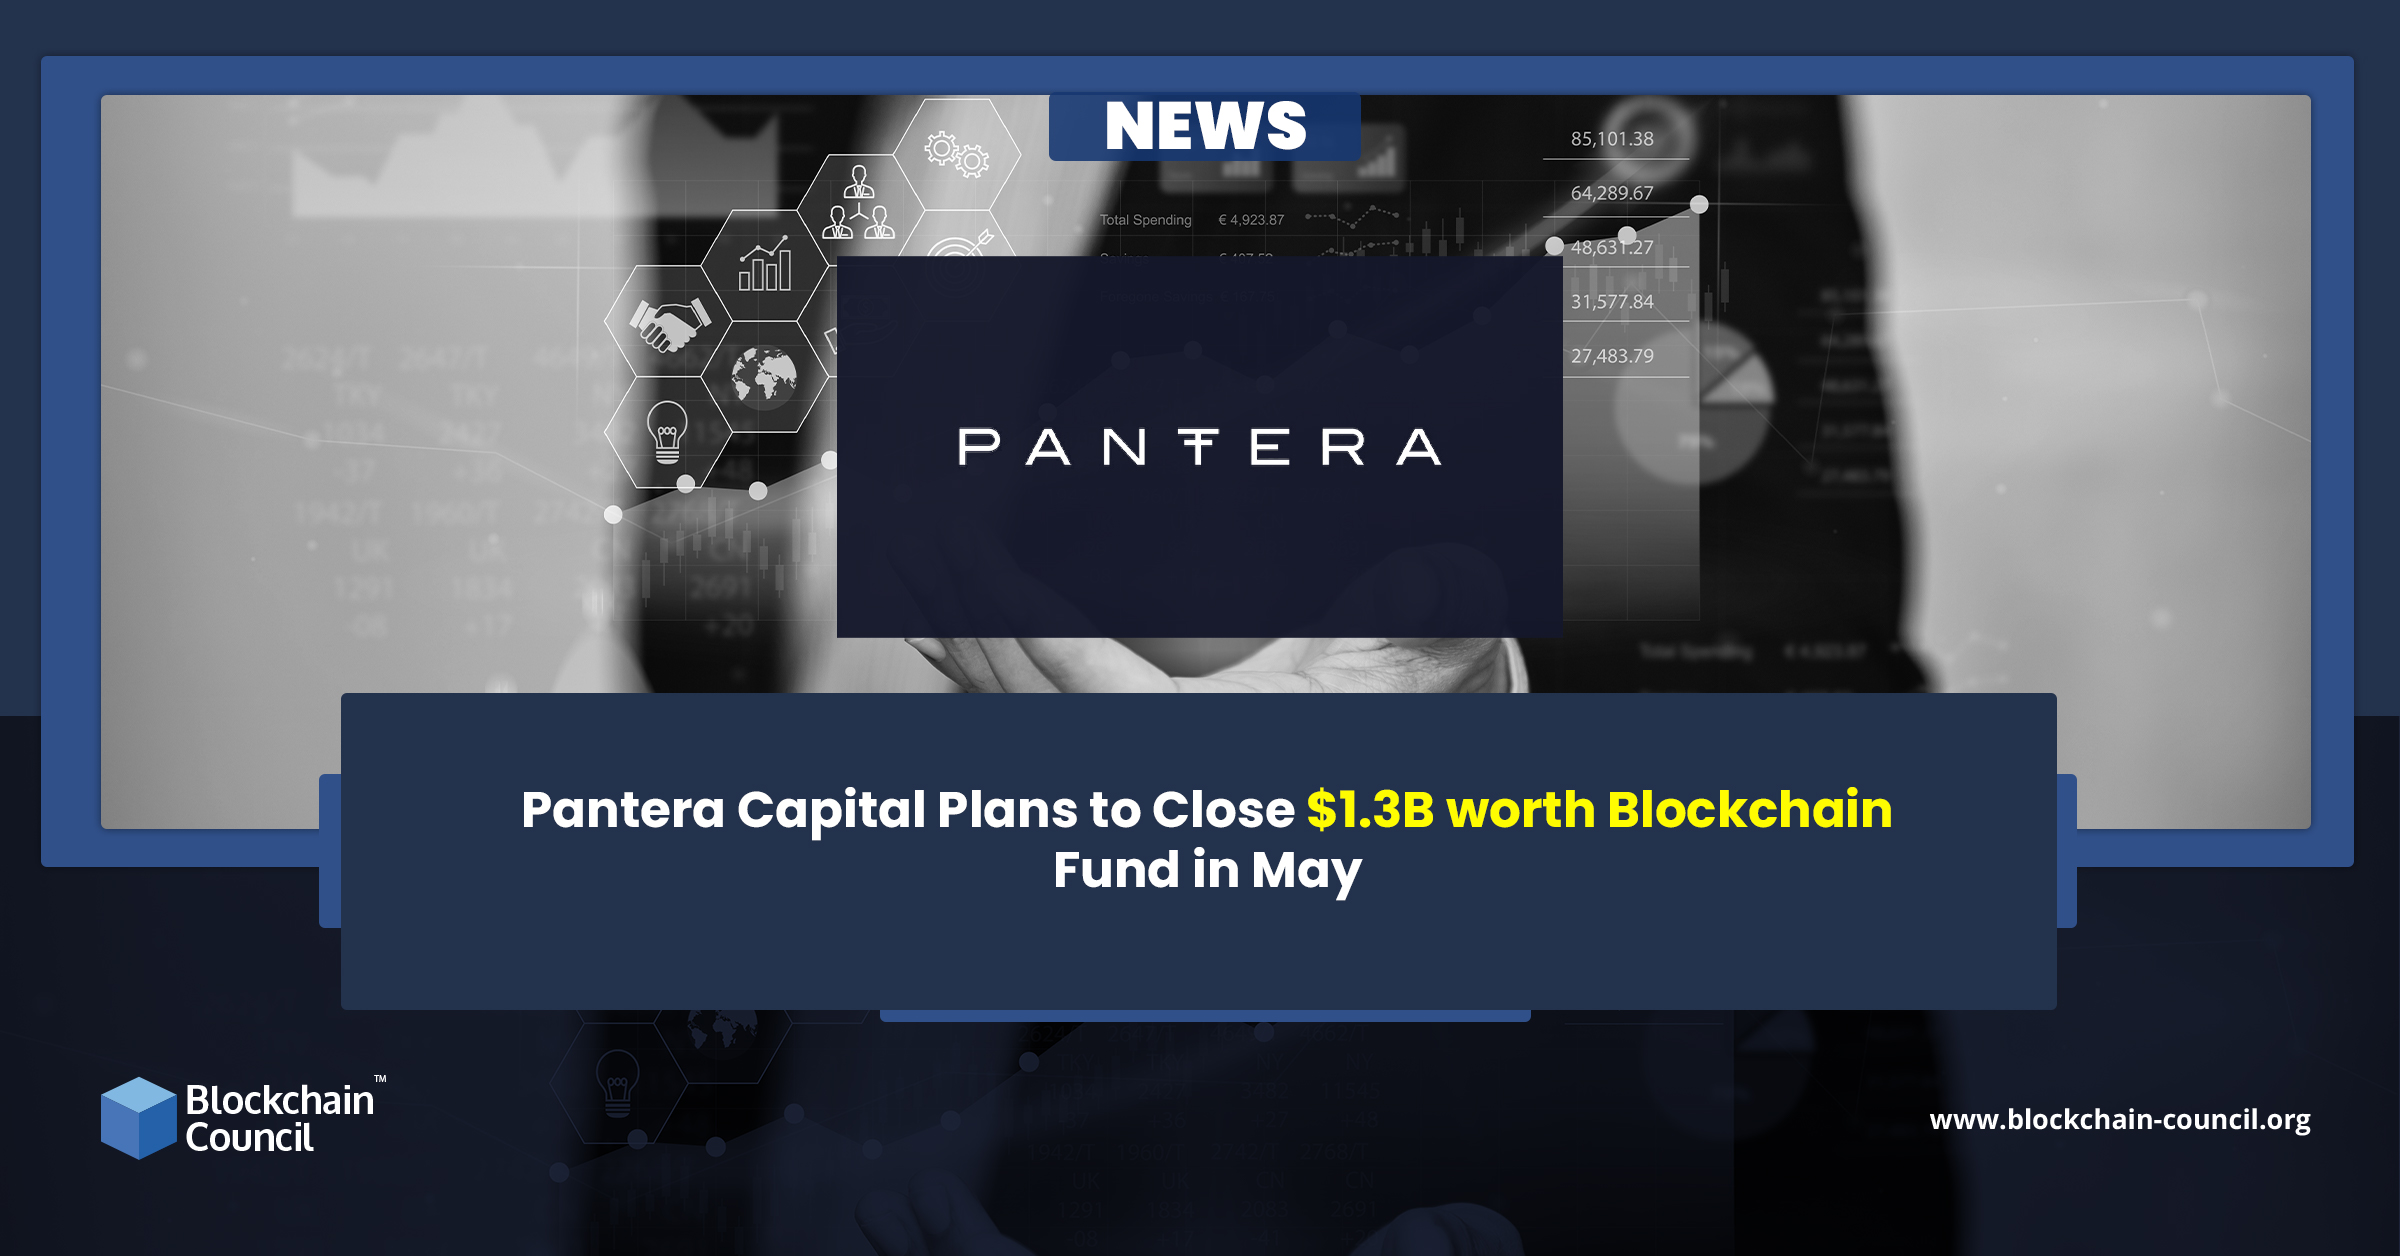 Pantera Capital Plans to Close $1.3B worth Blockchain Fund in May